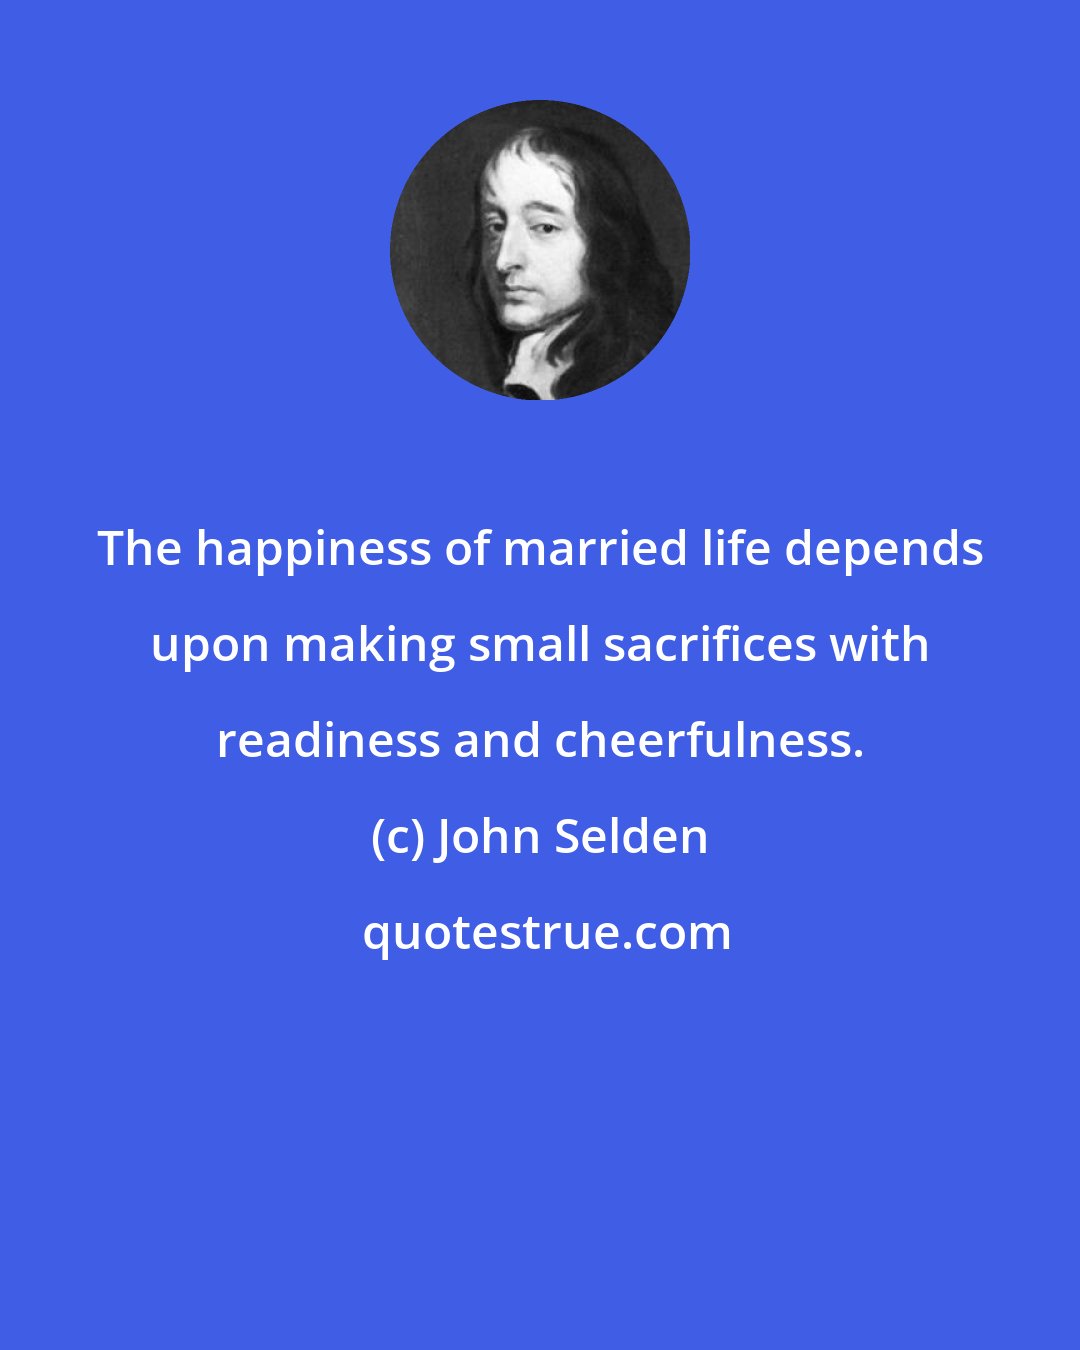 John Selden: The happiness of married life depends upon making small sacrifices with readiness and cheerfulness.